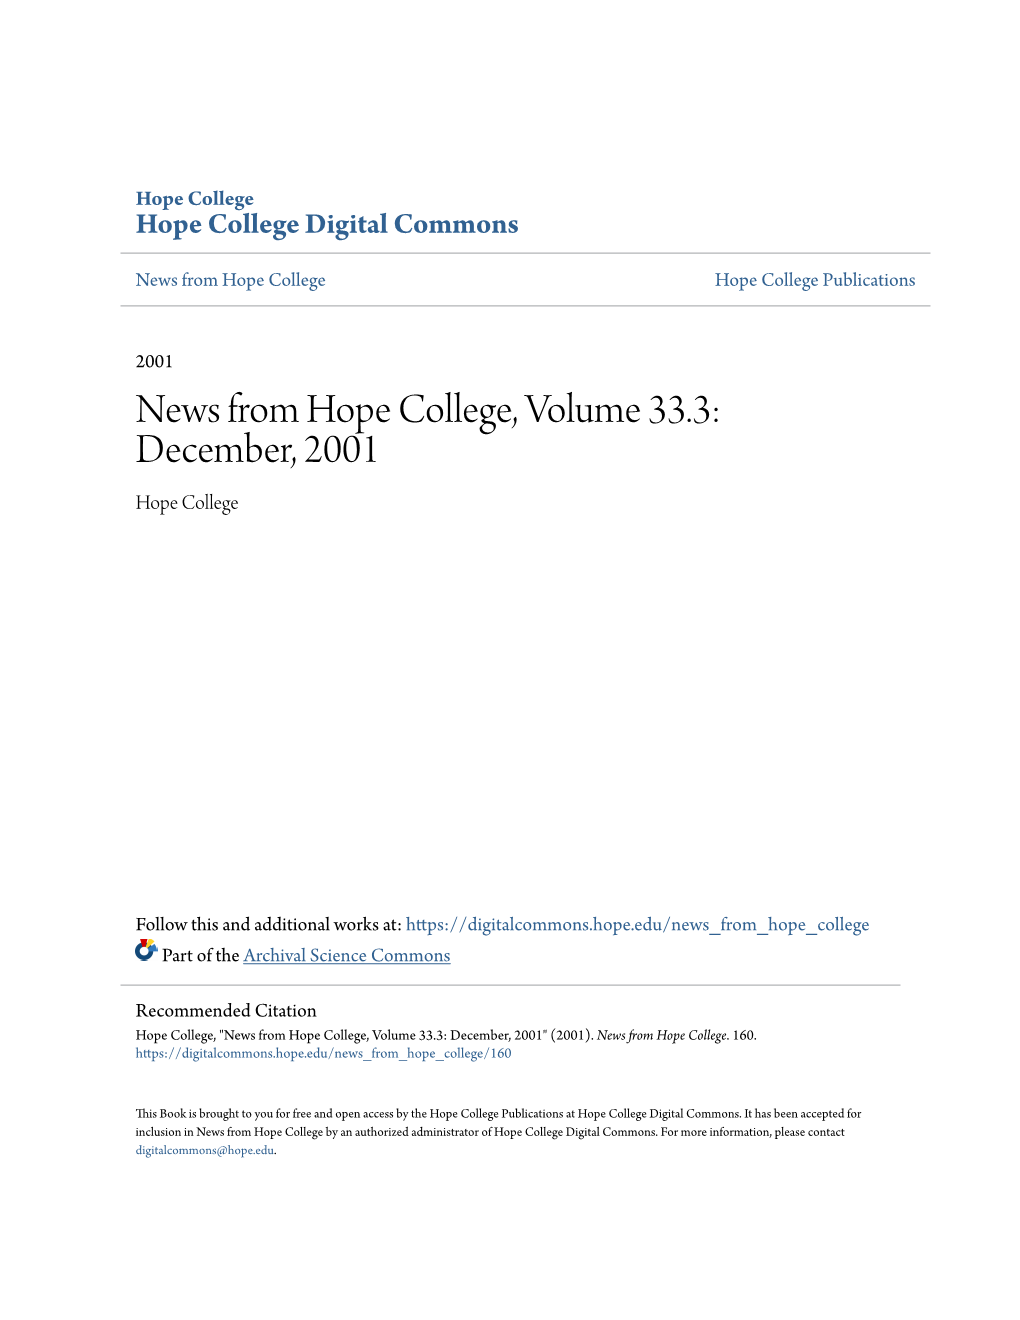 News from Hope College, Volume 33.3: December, 2001 Hope College